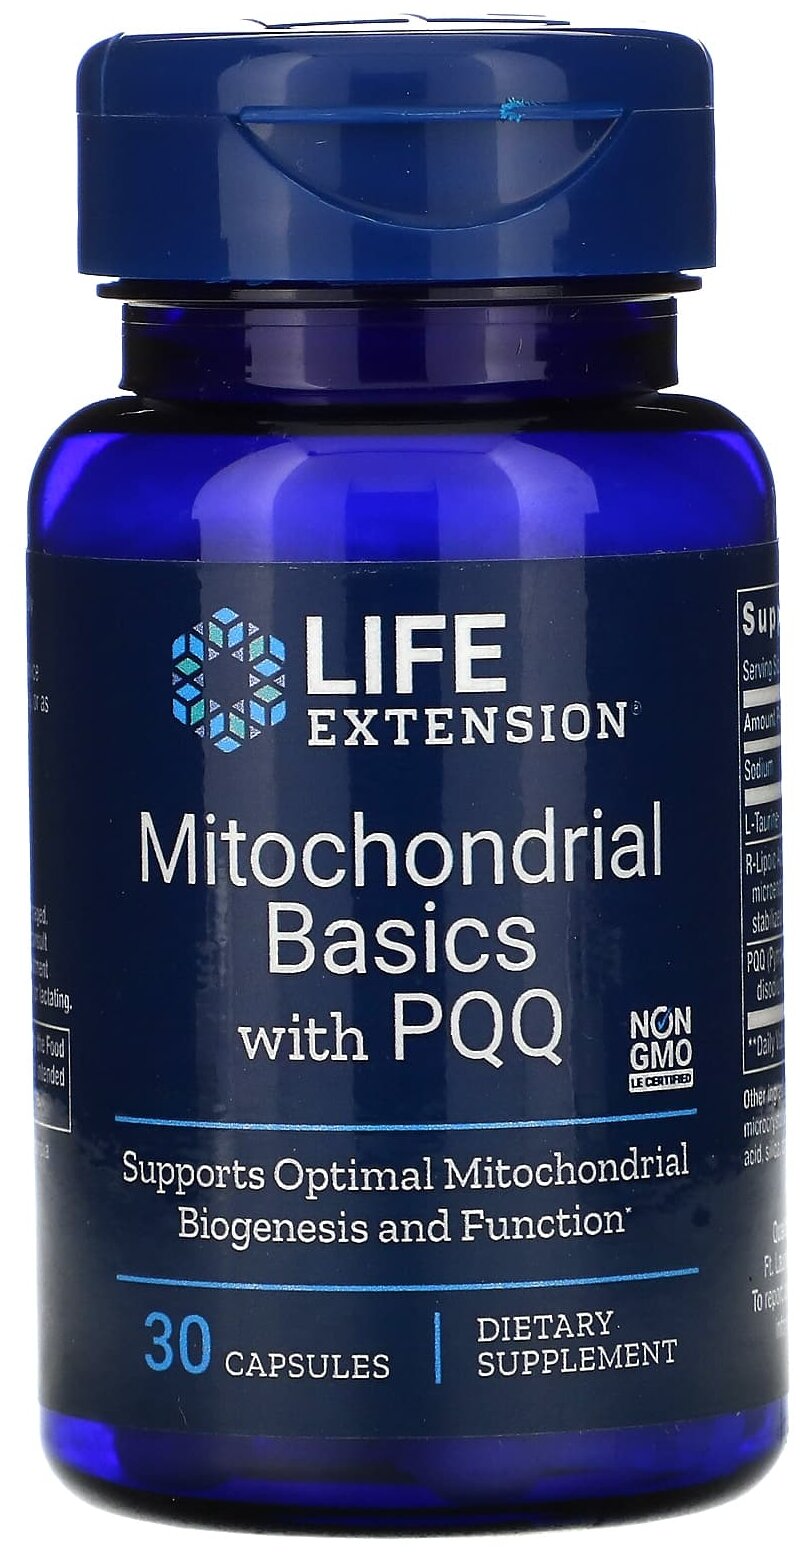 Капсулы Life Extension Mitochondrial Basics with PQQ, 50 г, 30 шт.